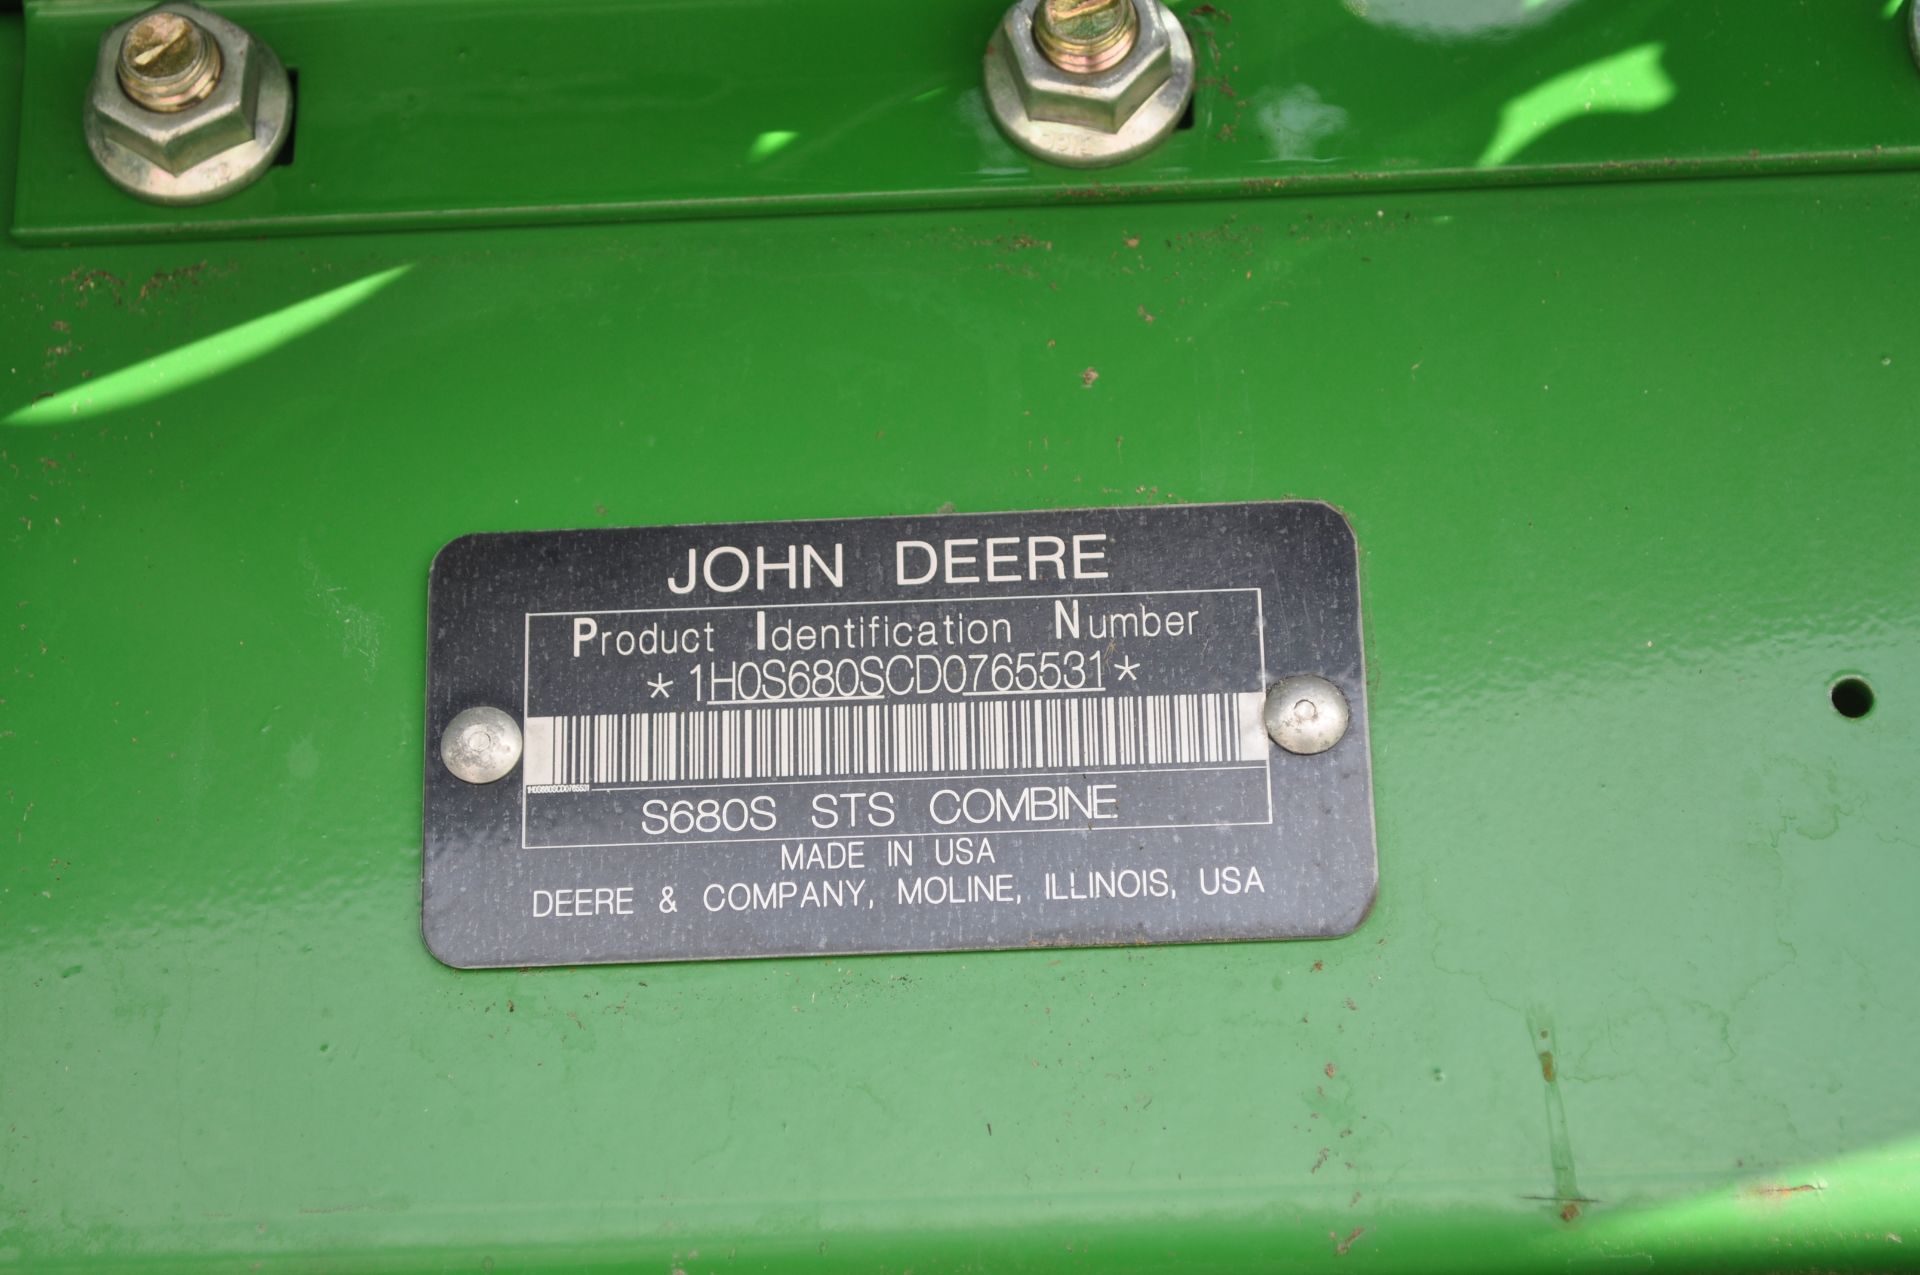 John Deere S680 combine, 1250/50R32 drive tires, 750/65R26 rear tires, PWRD, yield monitor, poly - Image 6 of 41